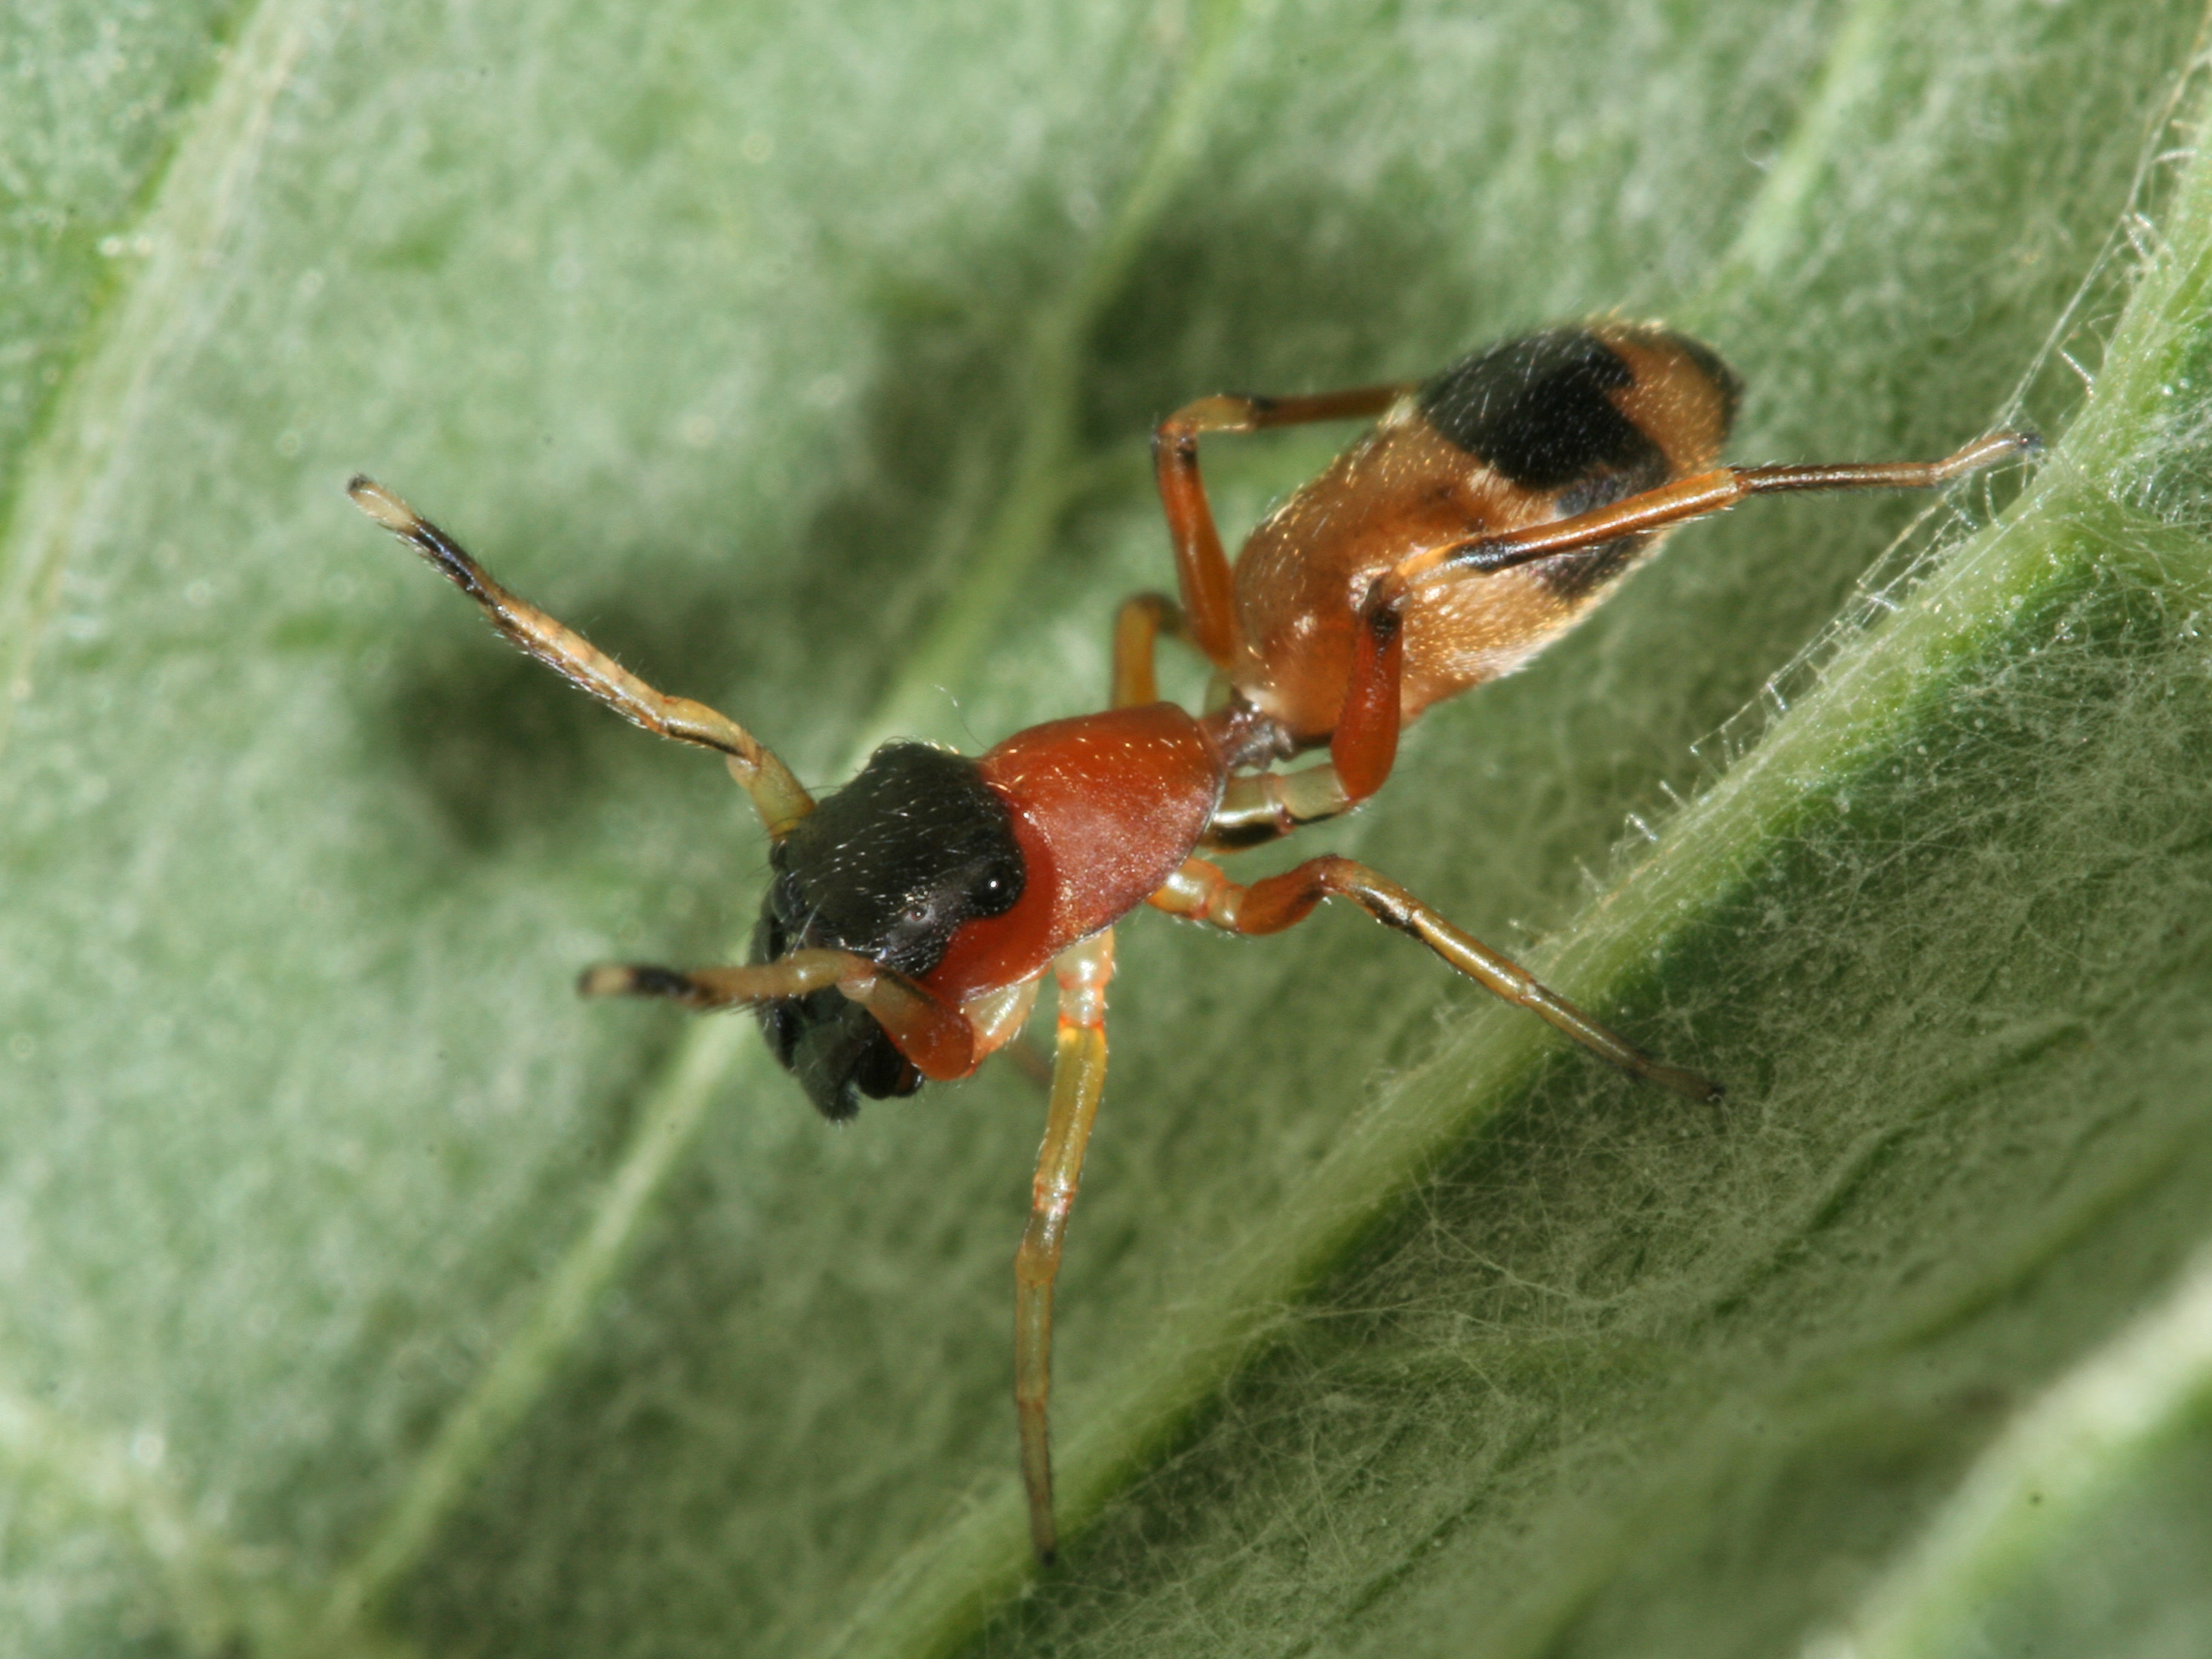 Female ant mimic jumping spider